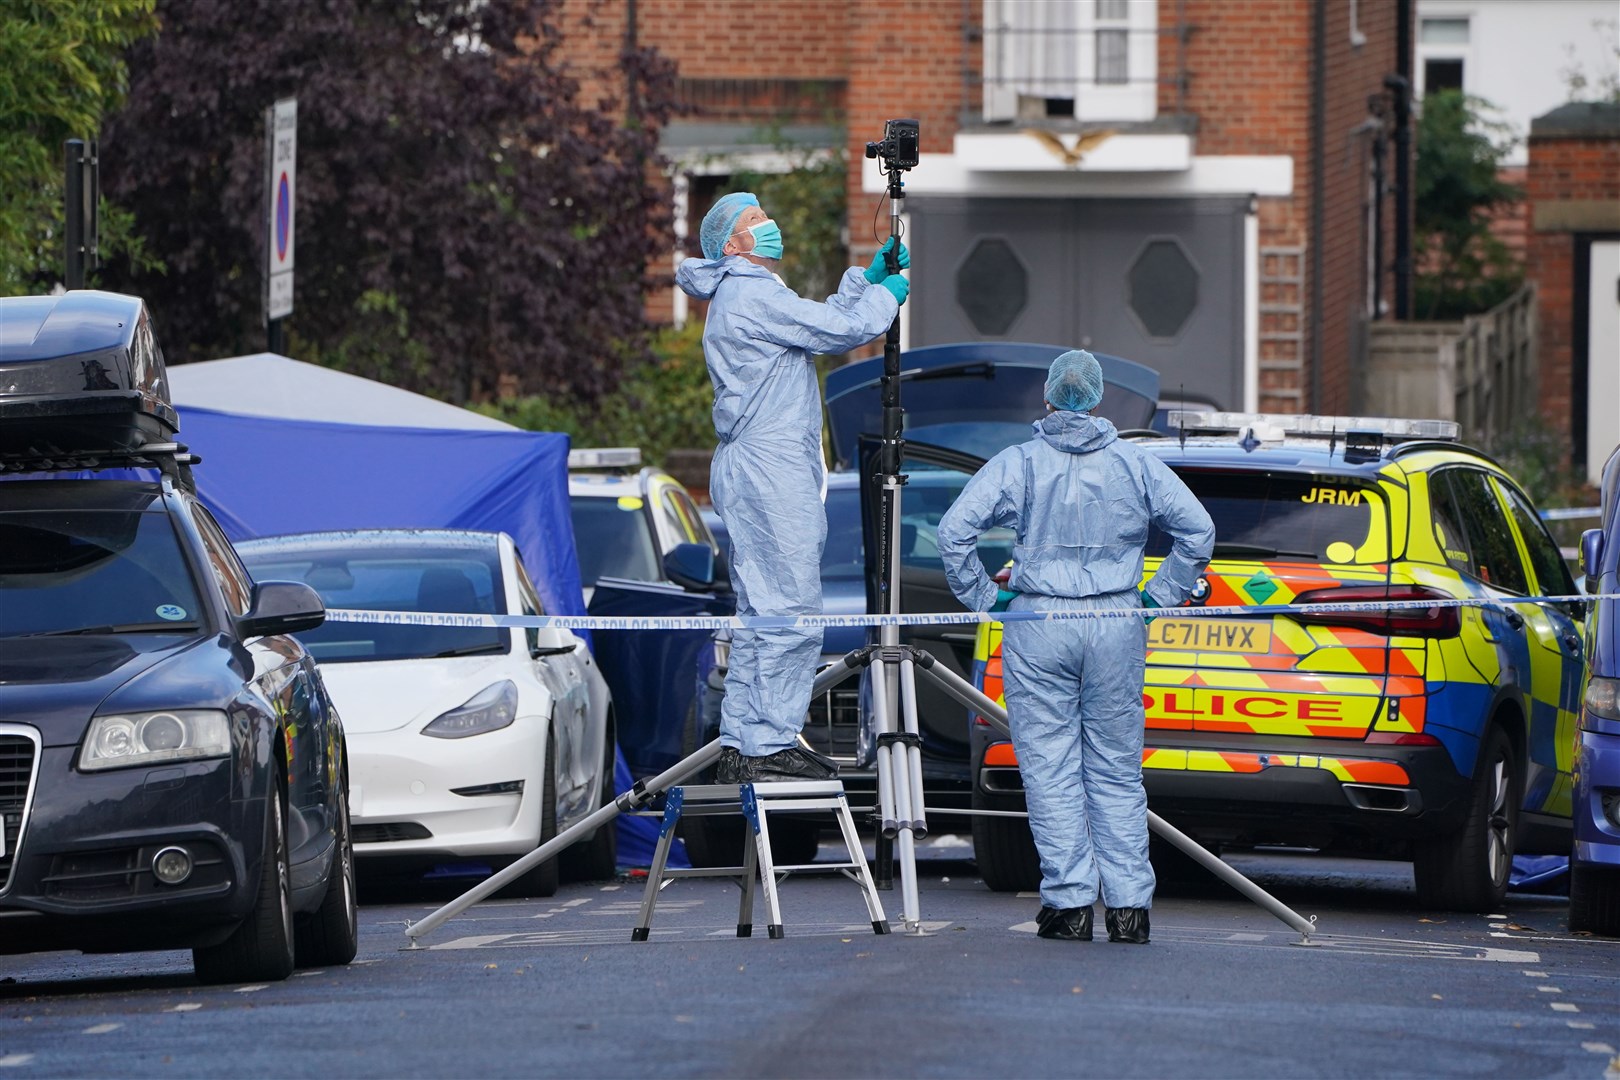 Forensic officers at the scene following the shooting (Jonathan Brady/PA)